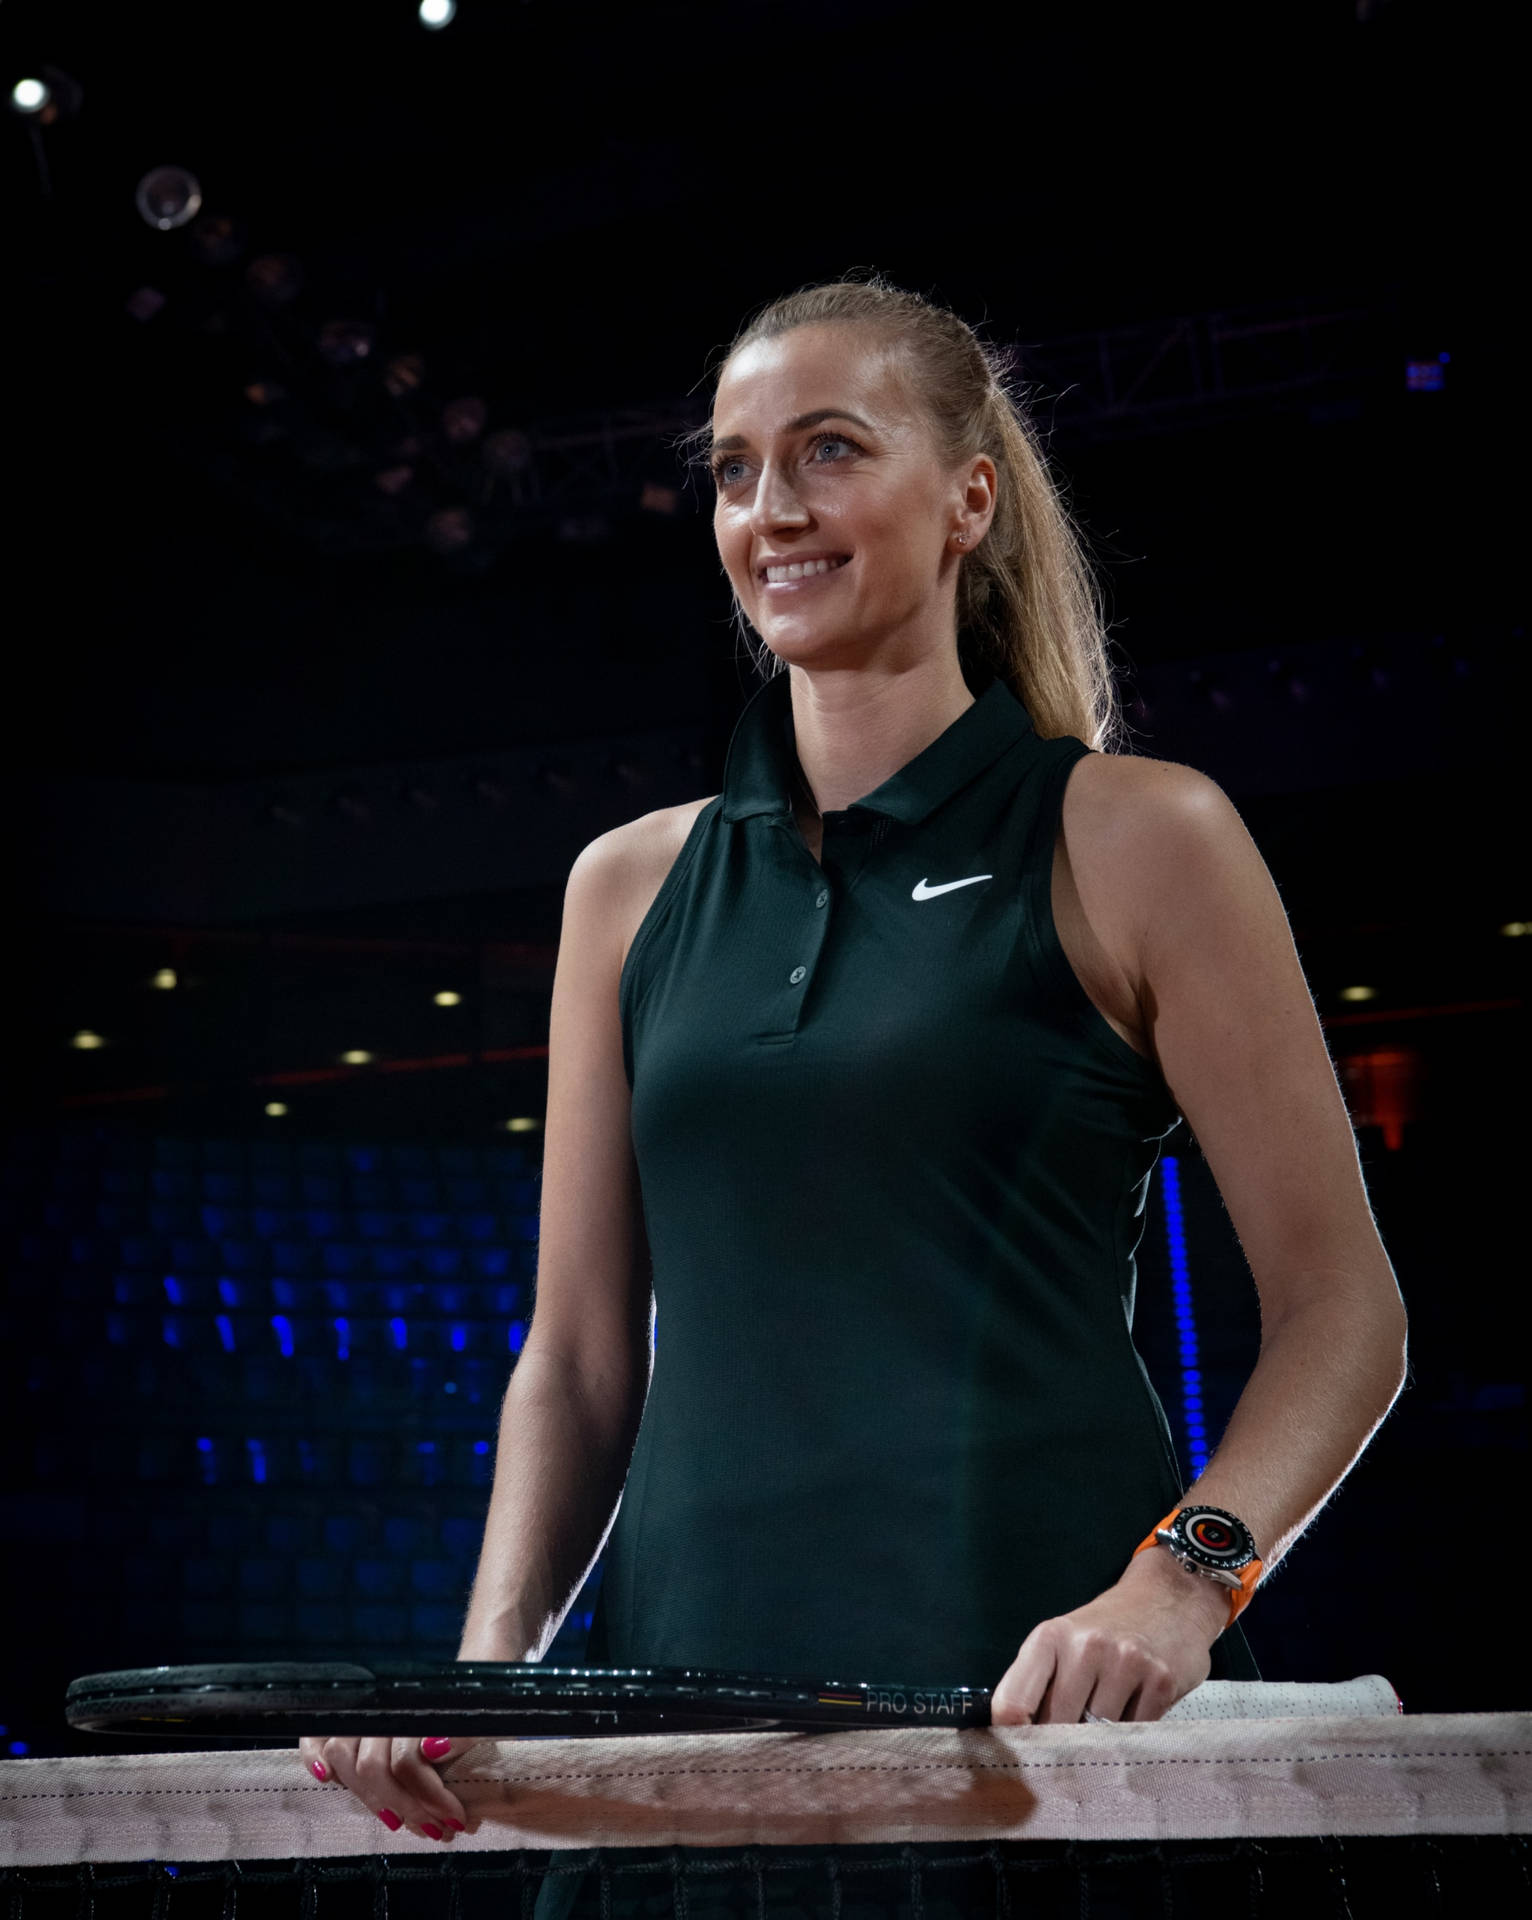 Petra Kvitova Smiling and Radiating Positivity in a Standing Pose Wallpaper